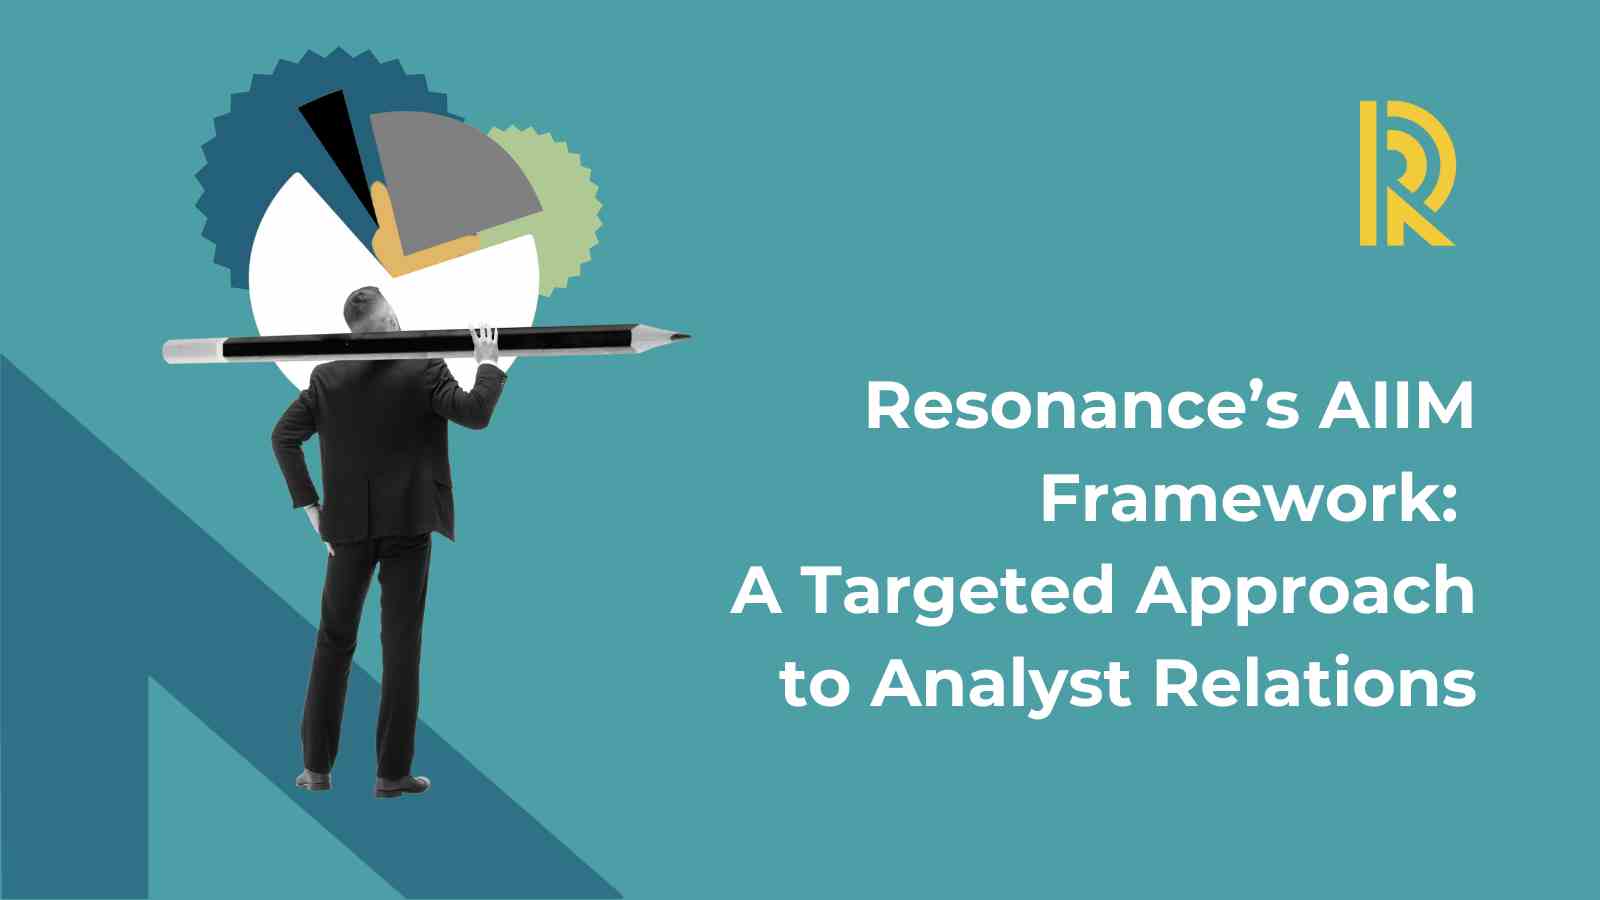 Resonance’s AIIM Framework: A Targeted Approach to Analyst Relations [Free Template]